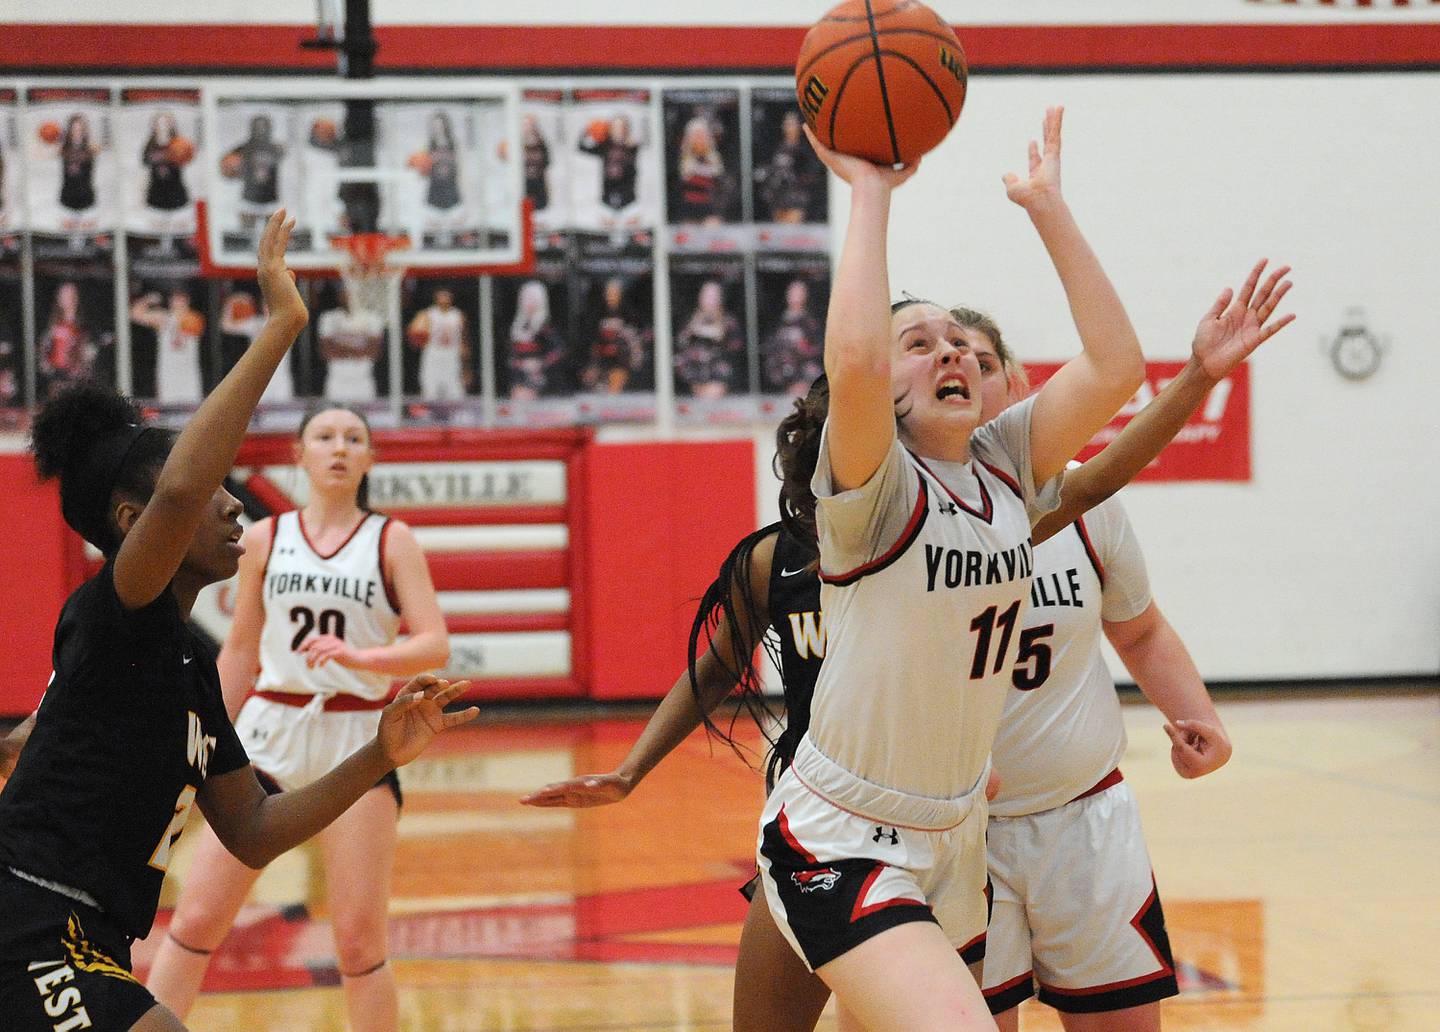 Yorkville's Brooke Spychalski (11) gets through the Joliet West defense and scores as time runs out in the 2nd quarter during a girls' basketball game at Yorkville on Thursday, Jan. 19, 2023.